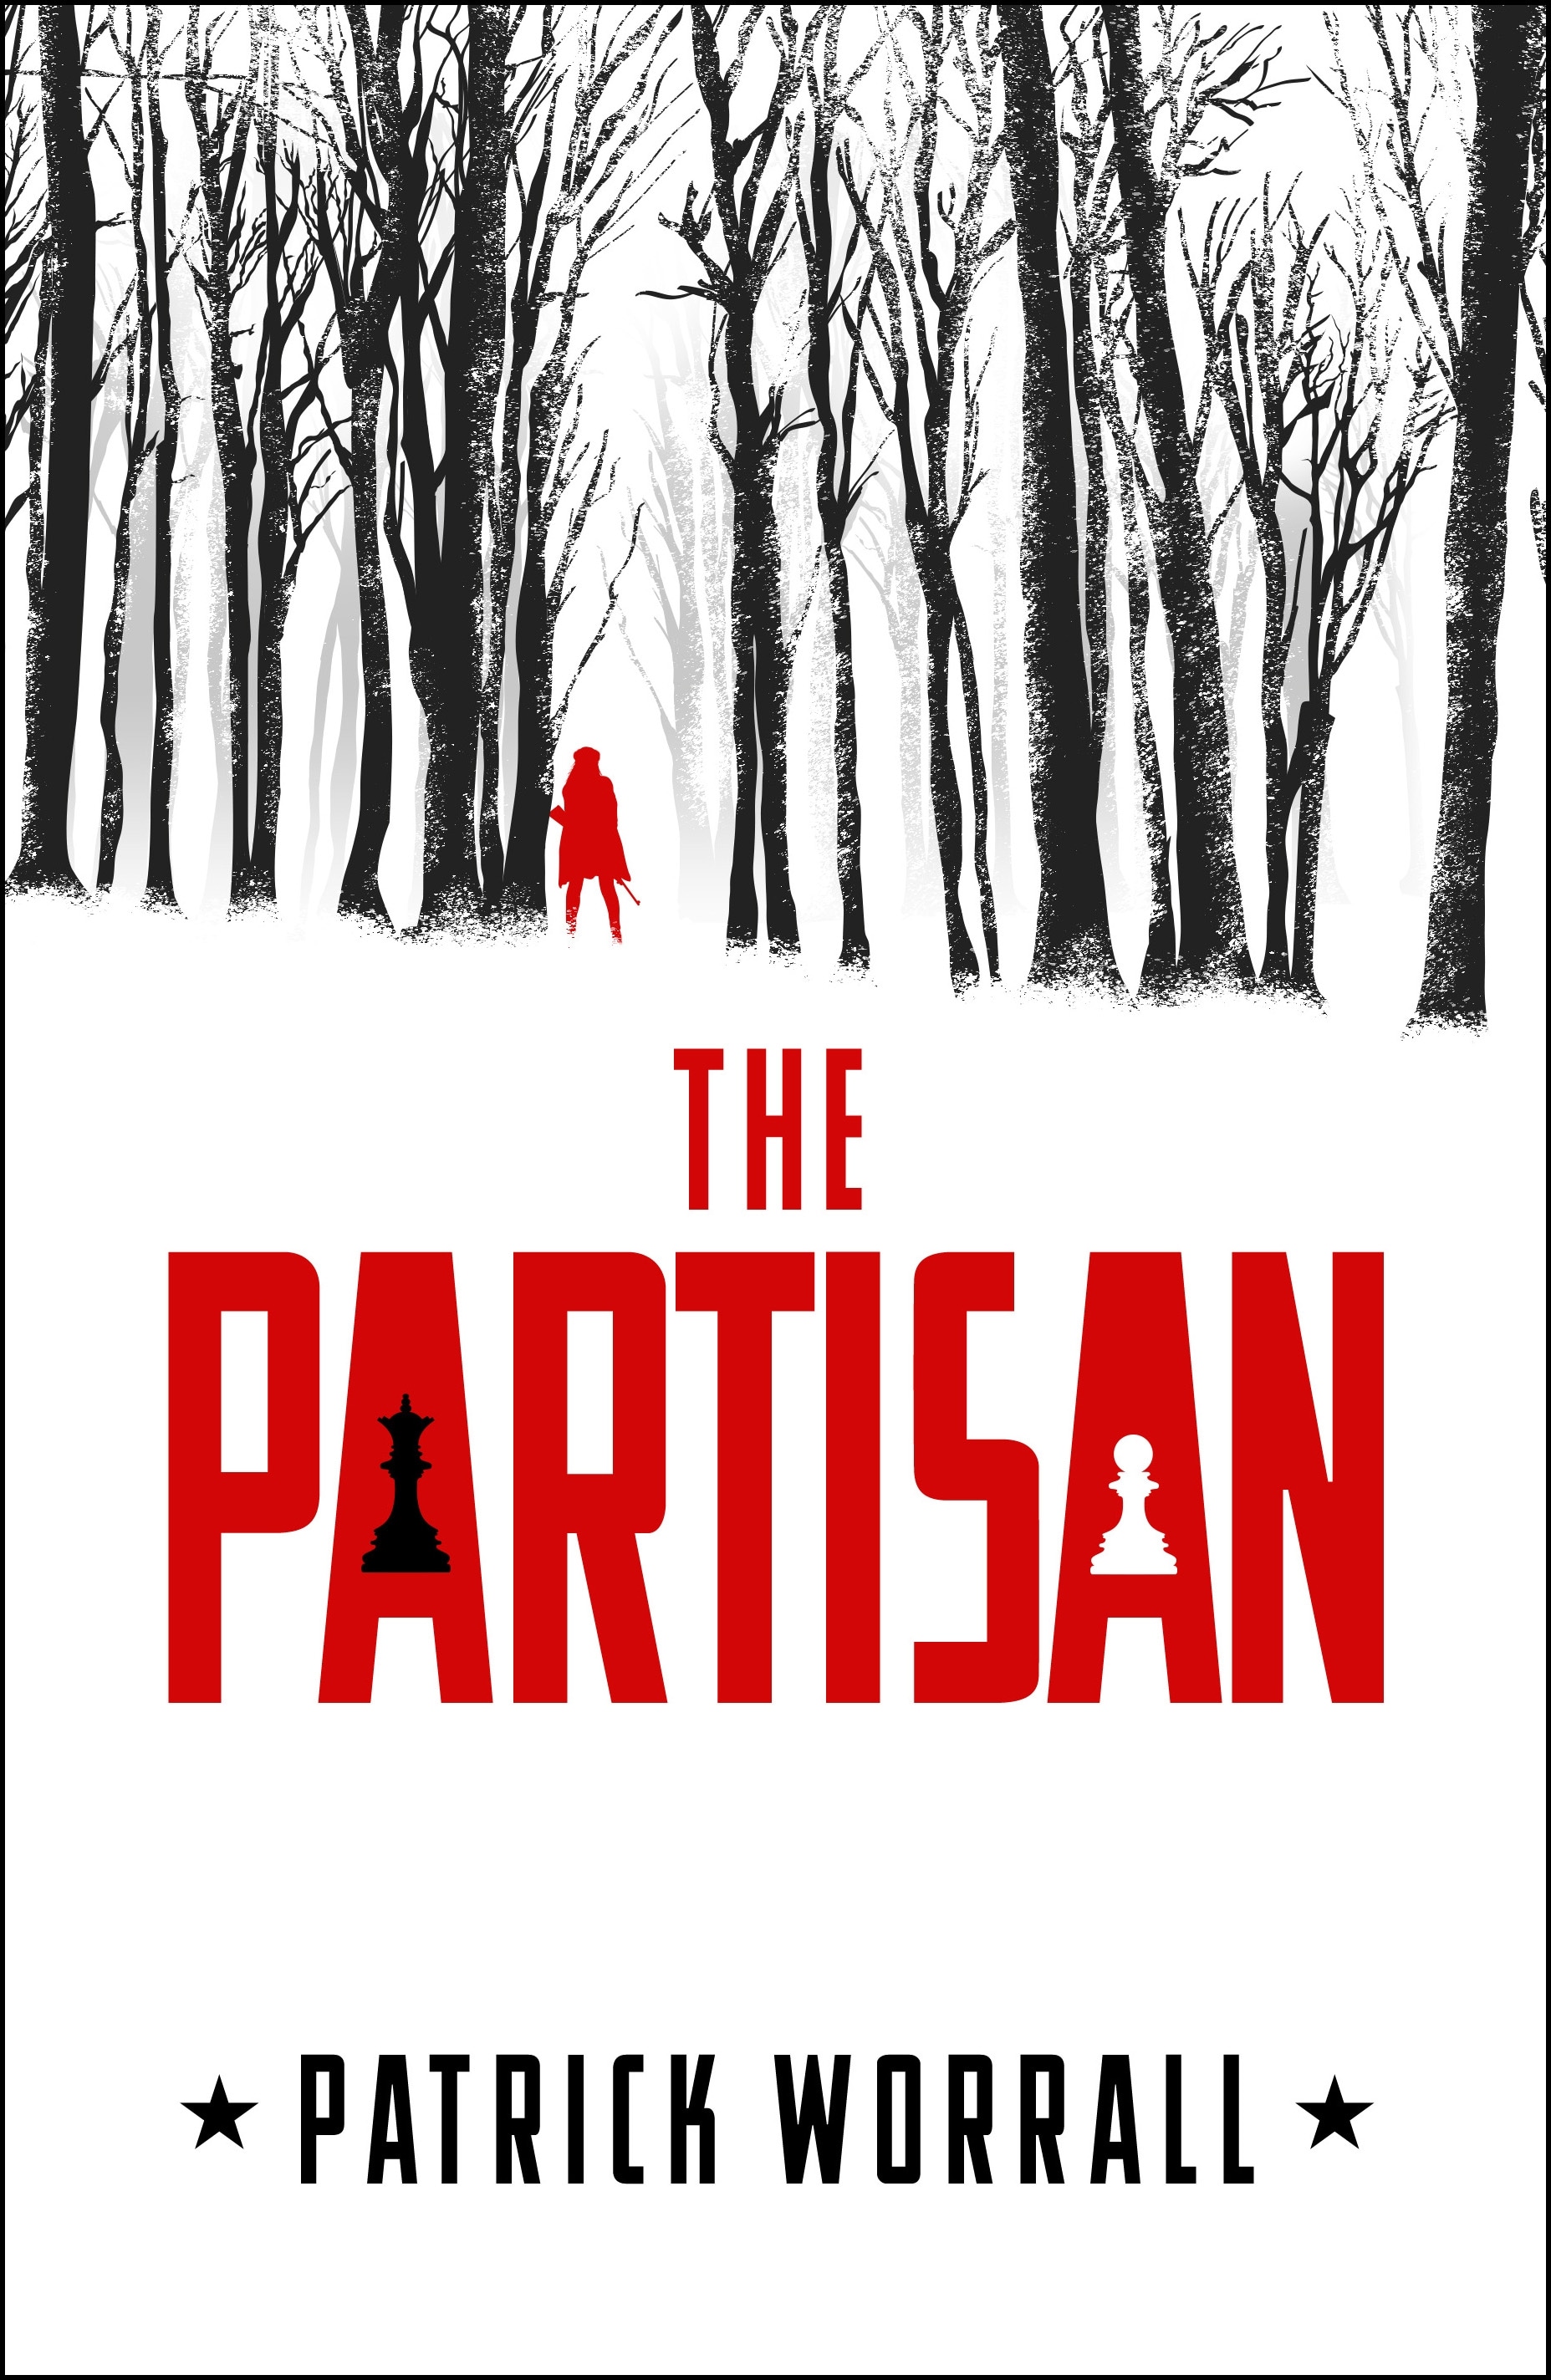 Book “The Partisan” by Patrick Worrall — July 7, 2022